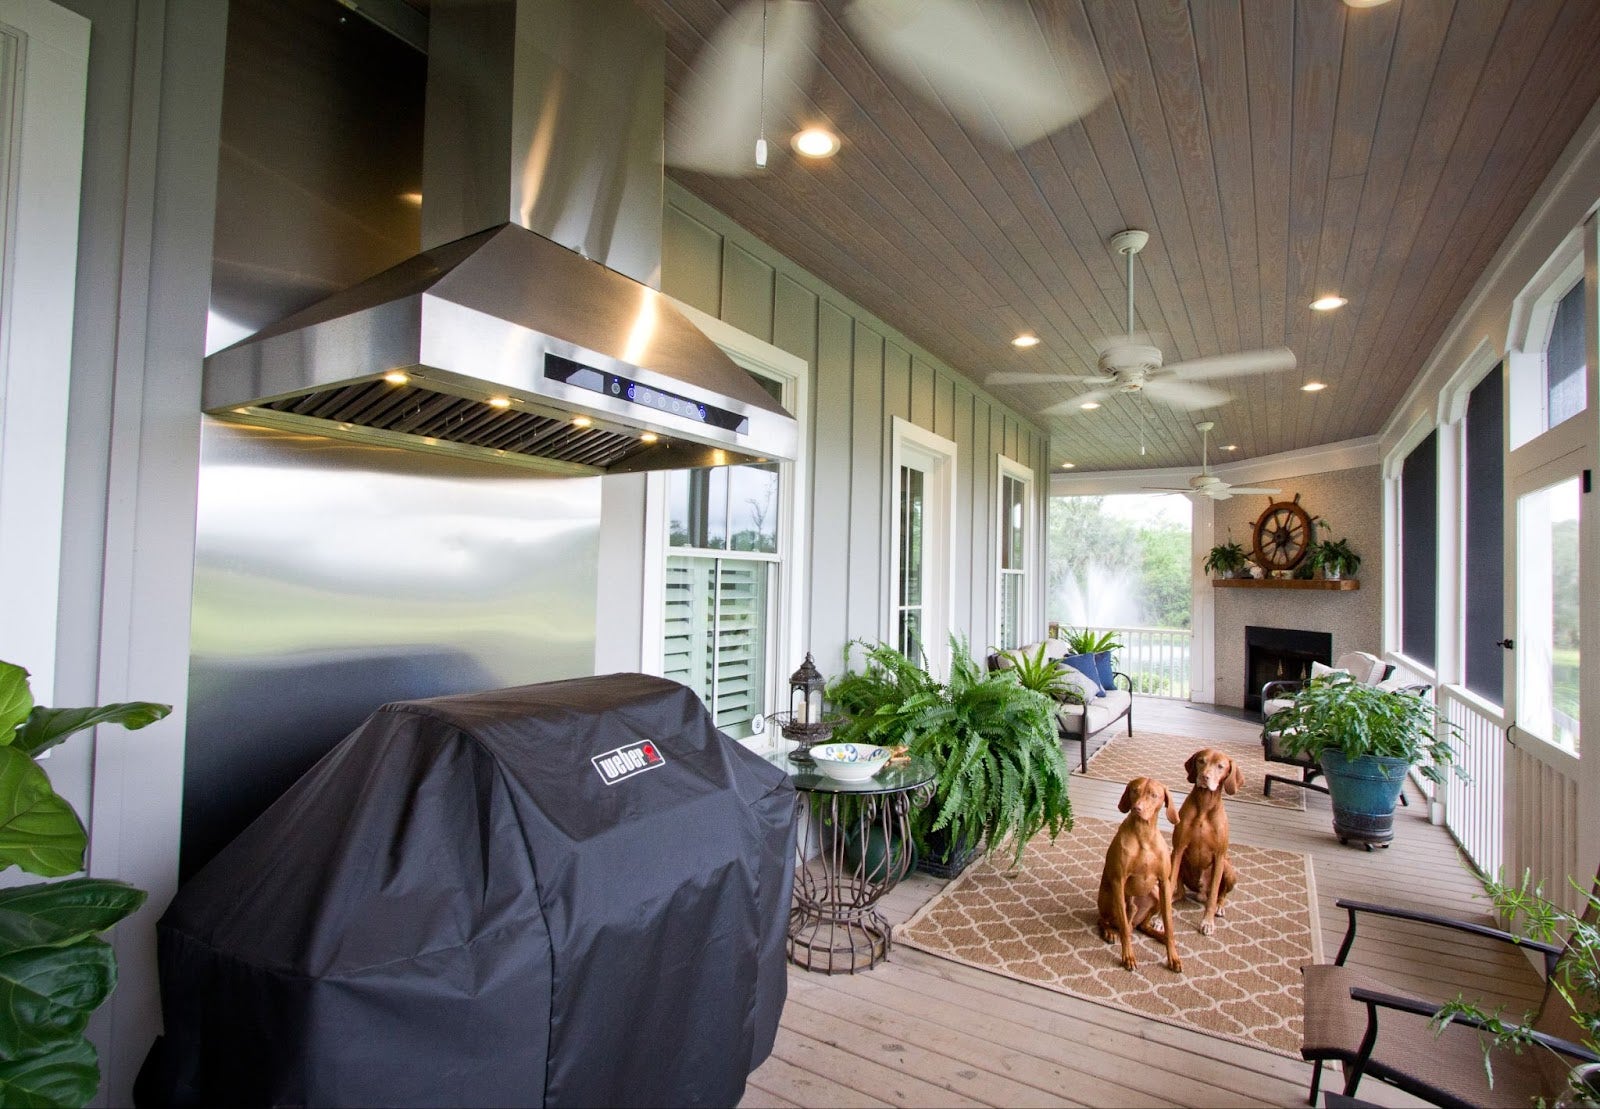 Southern Charm Outdoor Kitchen: Proline PLJI 102 hood vents smoke in this inviting outdoor kitchen. Fireplace and comfy porch seating create a relaxing space for grilling and socializing. - Proline Range Hoods - prolinerangehoods.com 